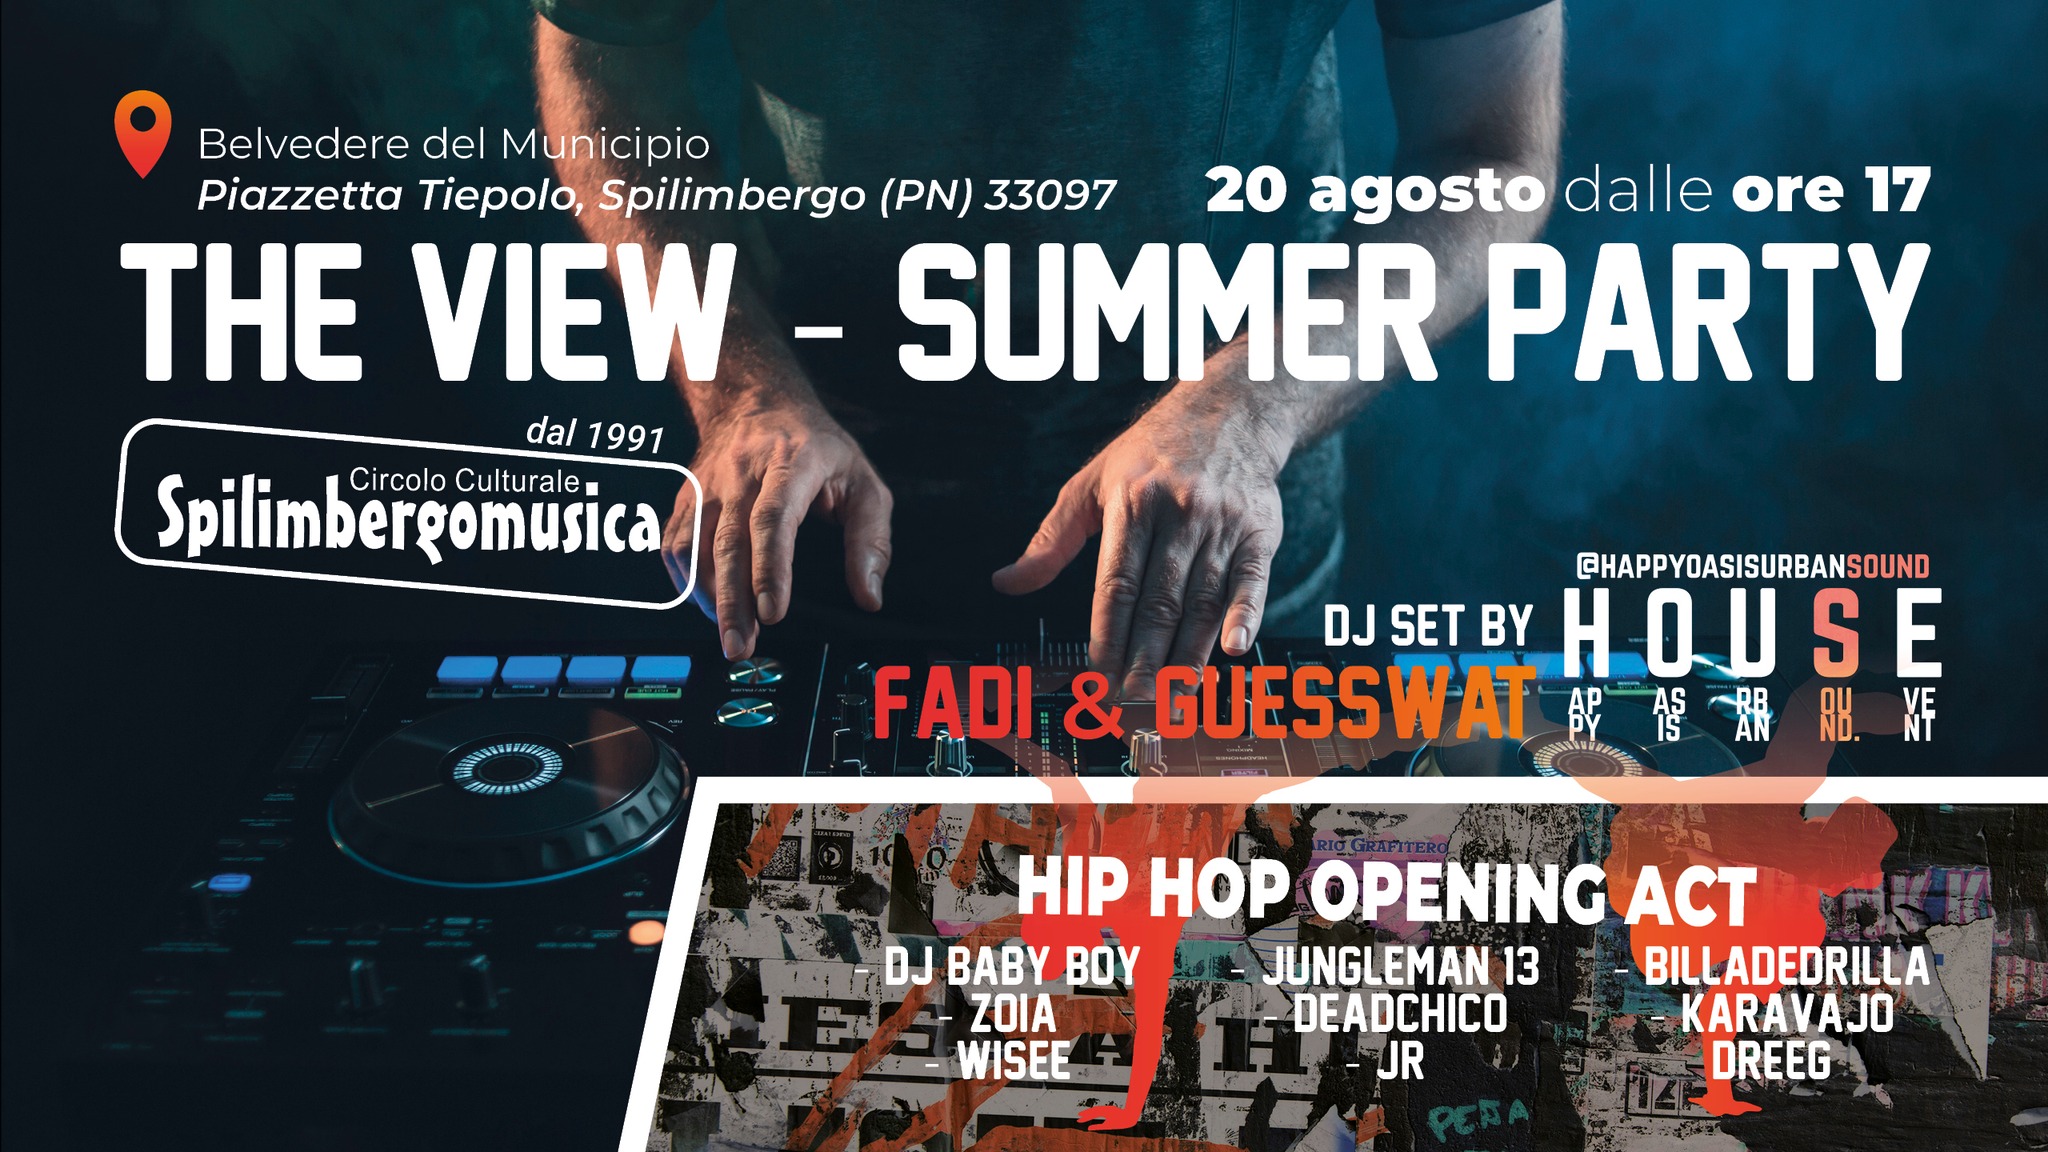 The View - Spilimbergomusica Summer Party